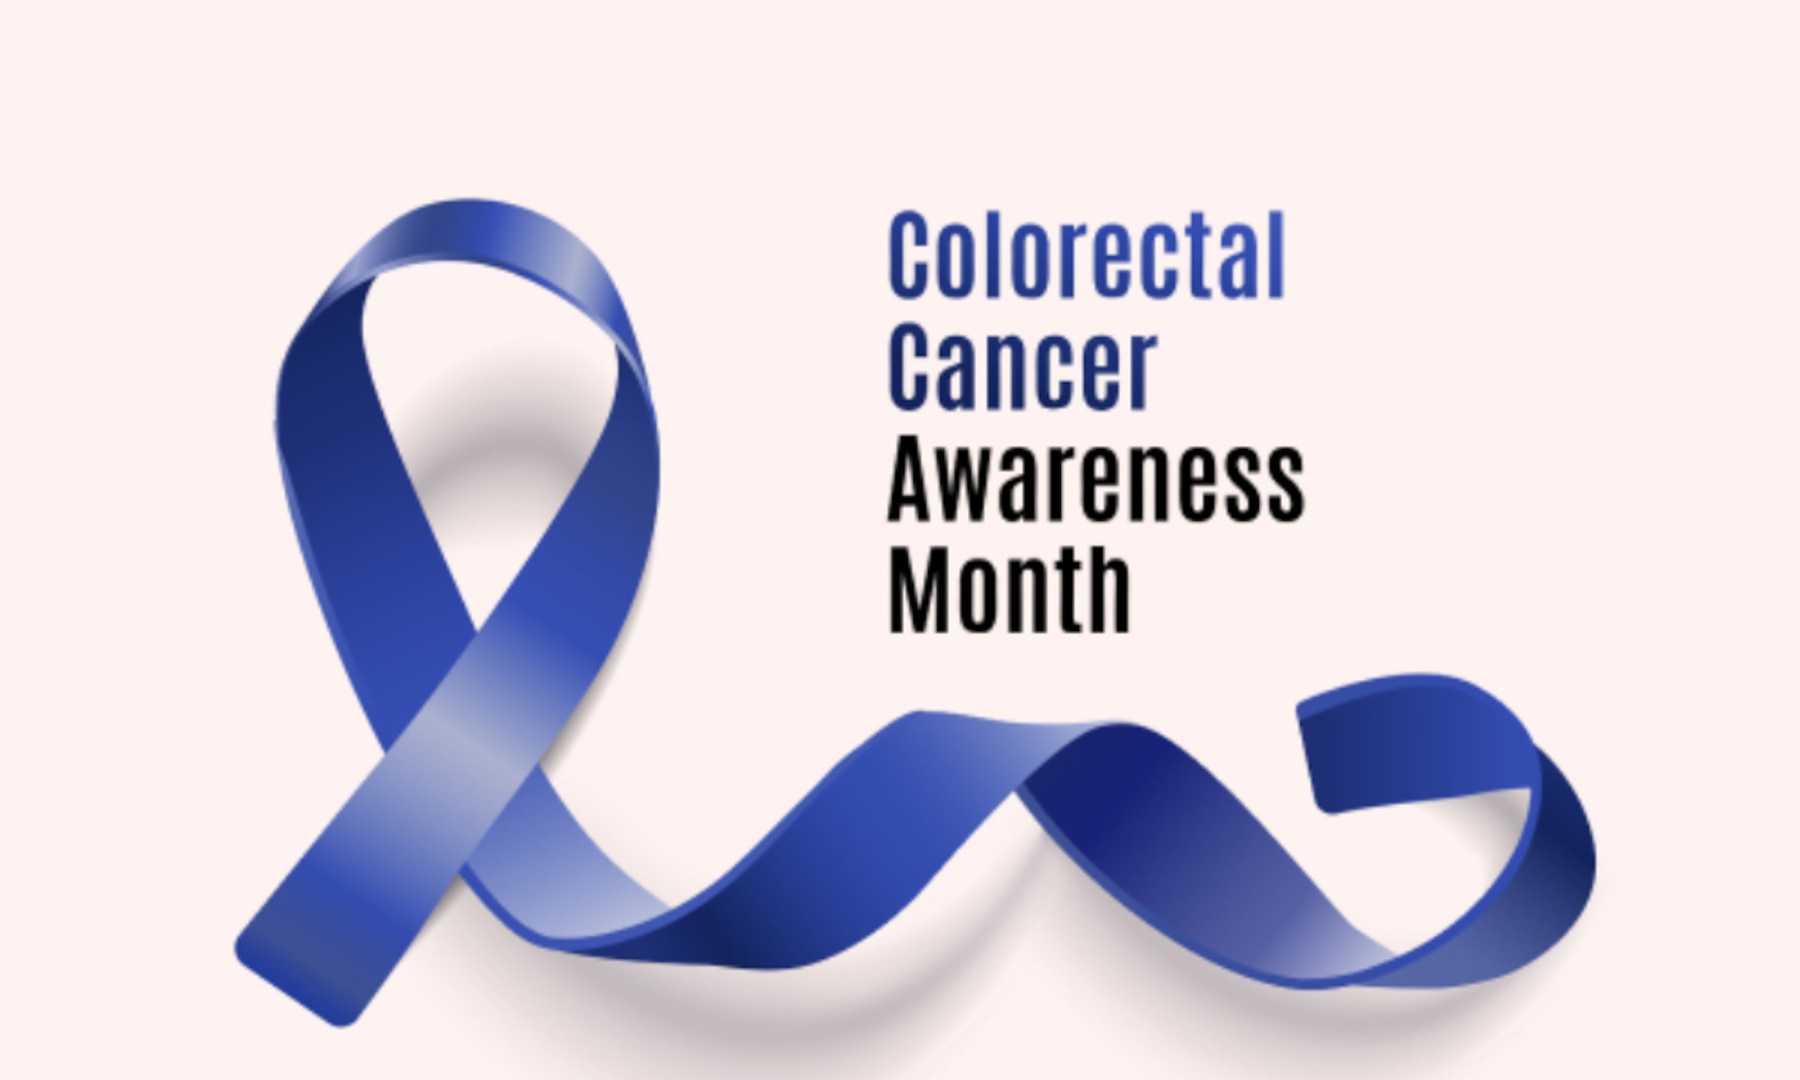 Blue is the color of the ribbon drawing awareness to colorectal cancer. Observed during March, Colorectal Cancer Awareness Month seeks to increase the public’s knowledge about the disease and encourage people to get screened for it.